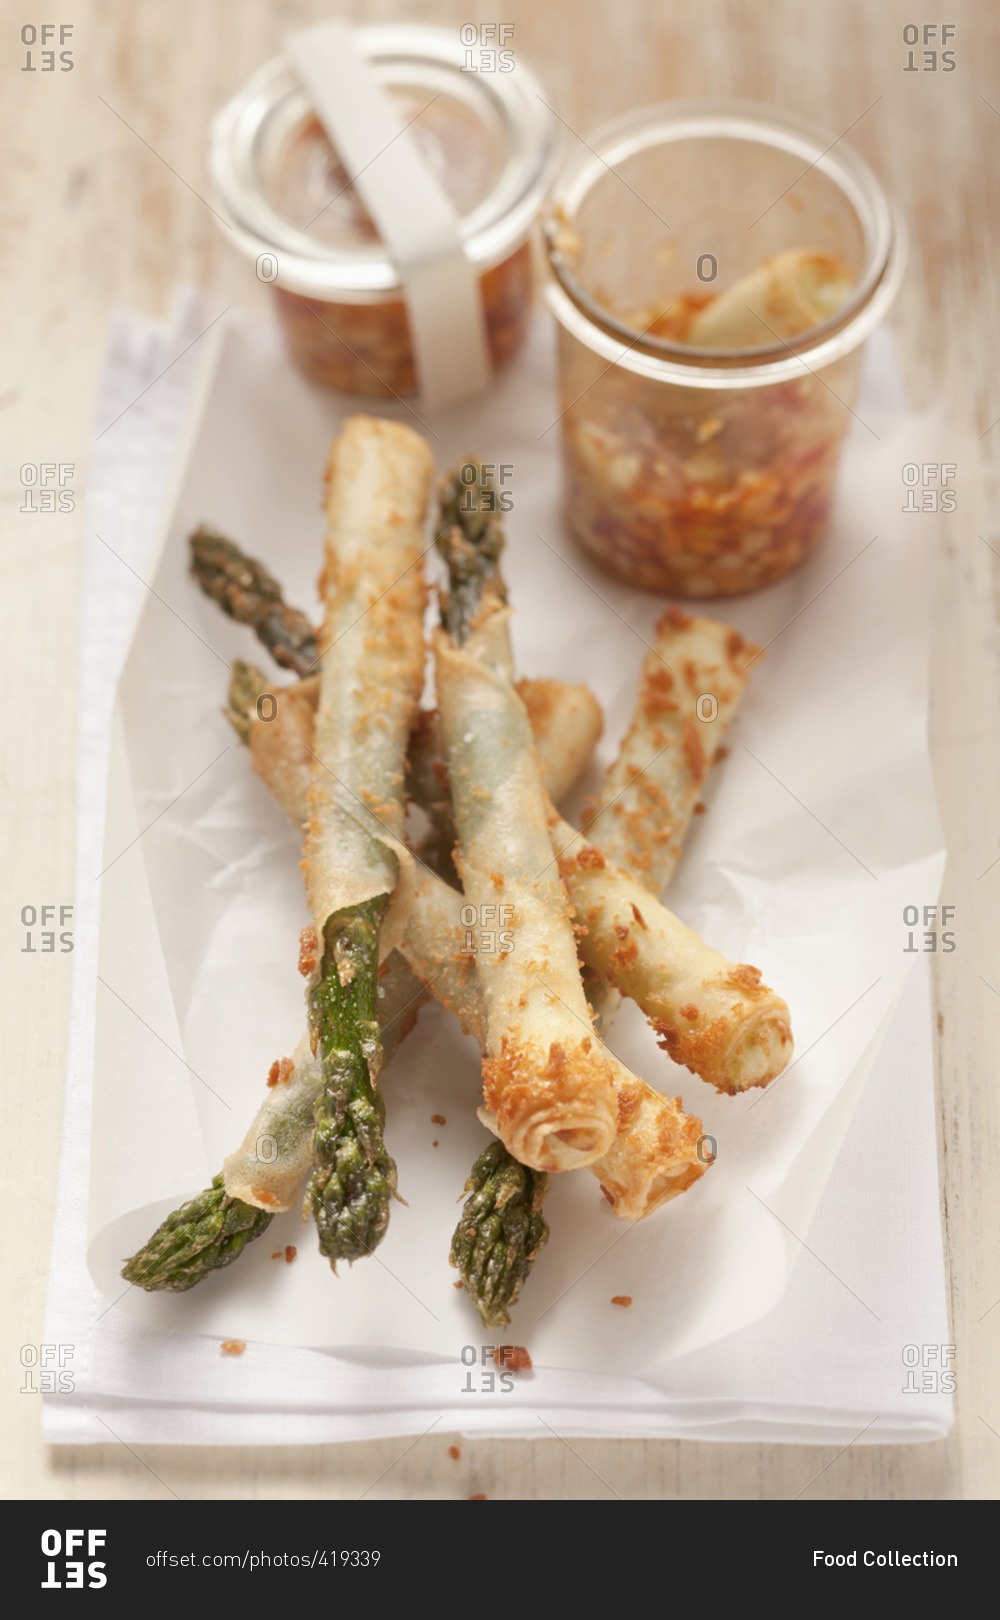 Green asparagus in spring roll pastry with a chili, cucumber and peanut dip